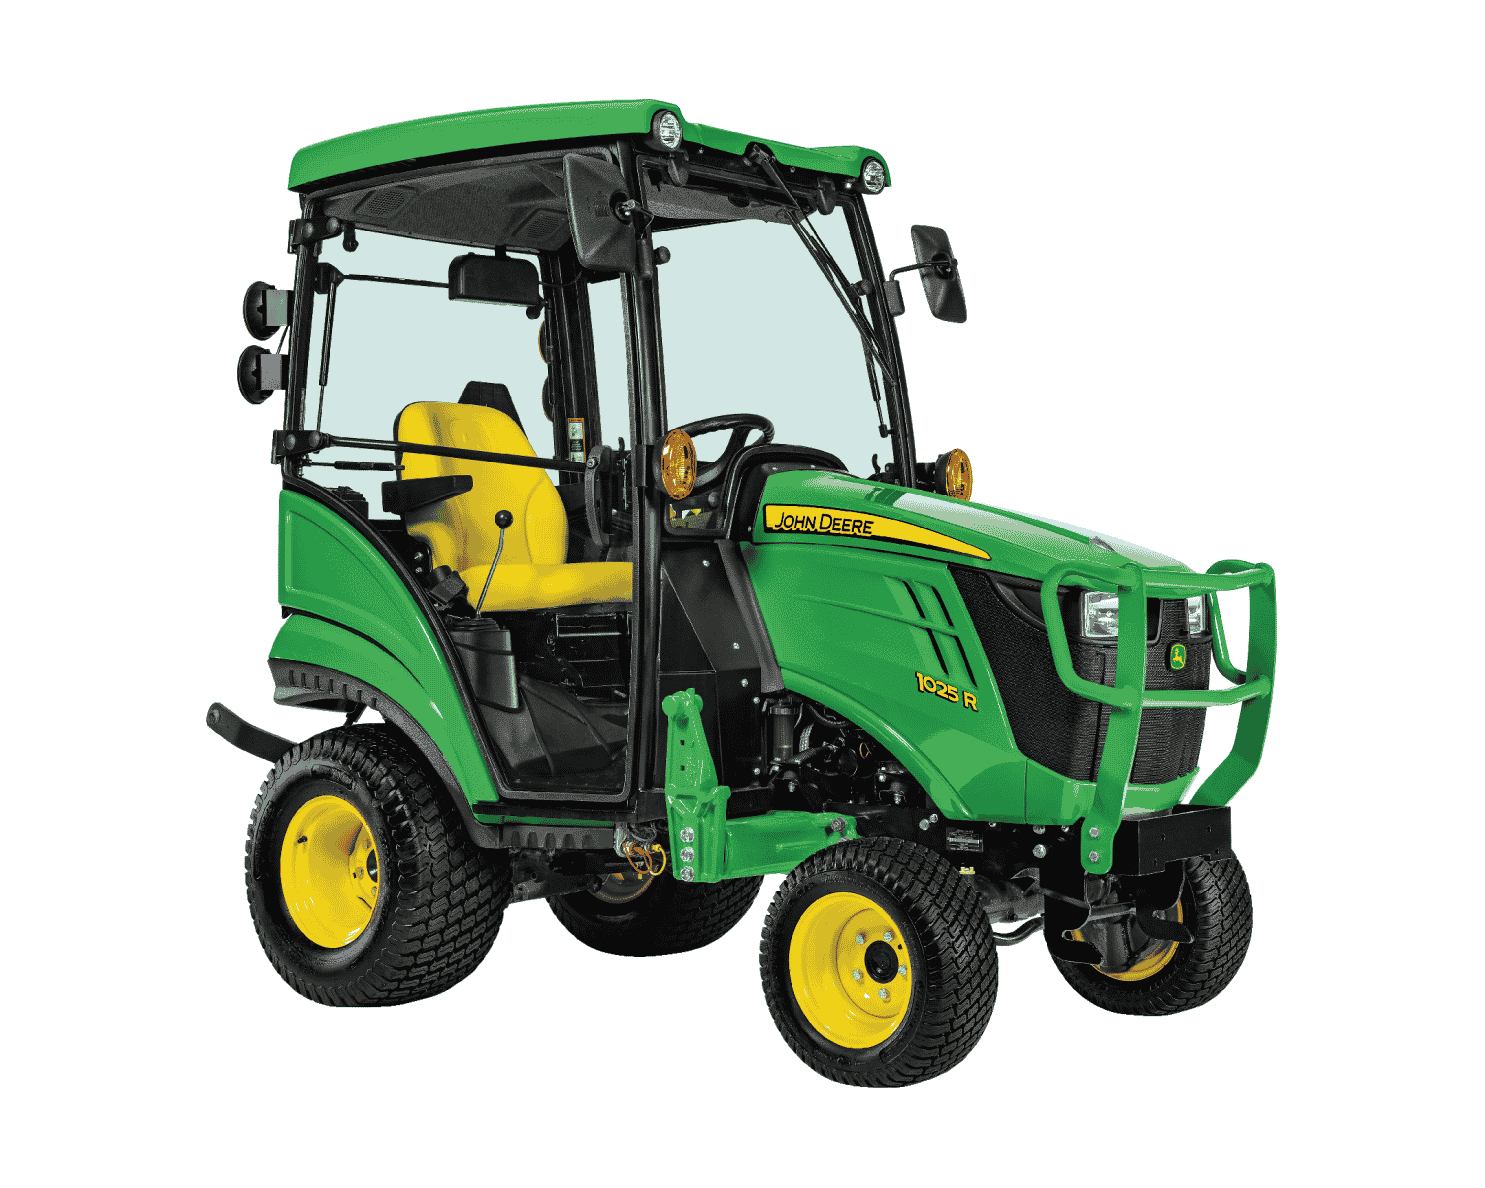 John Deere 1025r Sub Compact Tractor Compact Utility